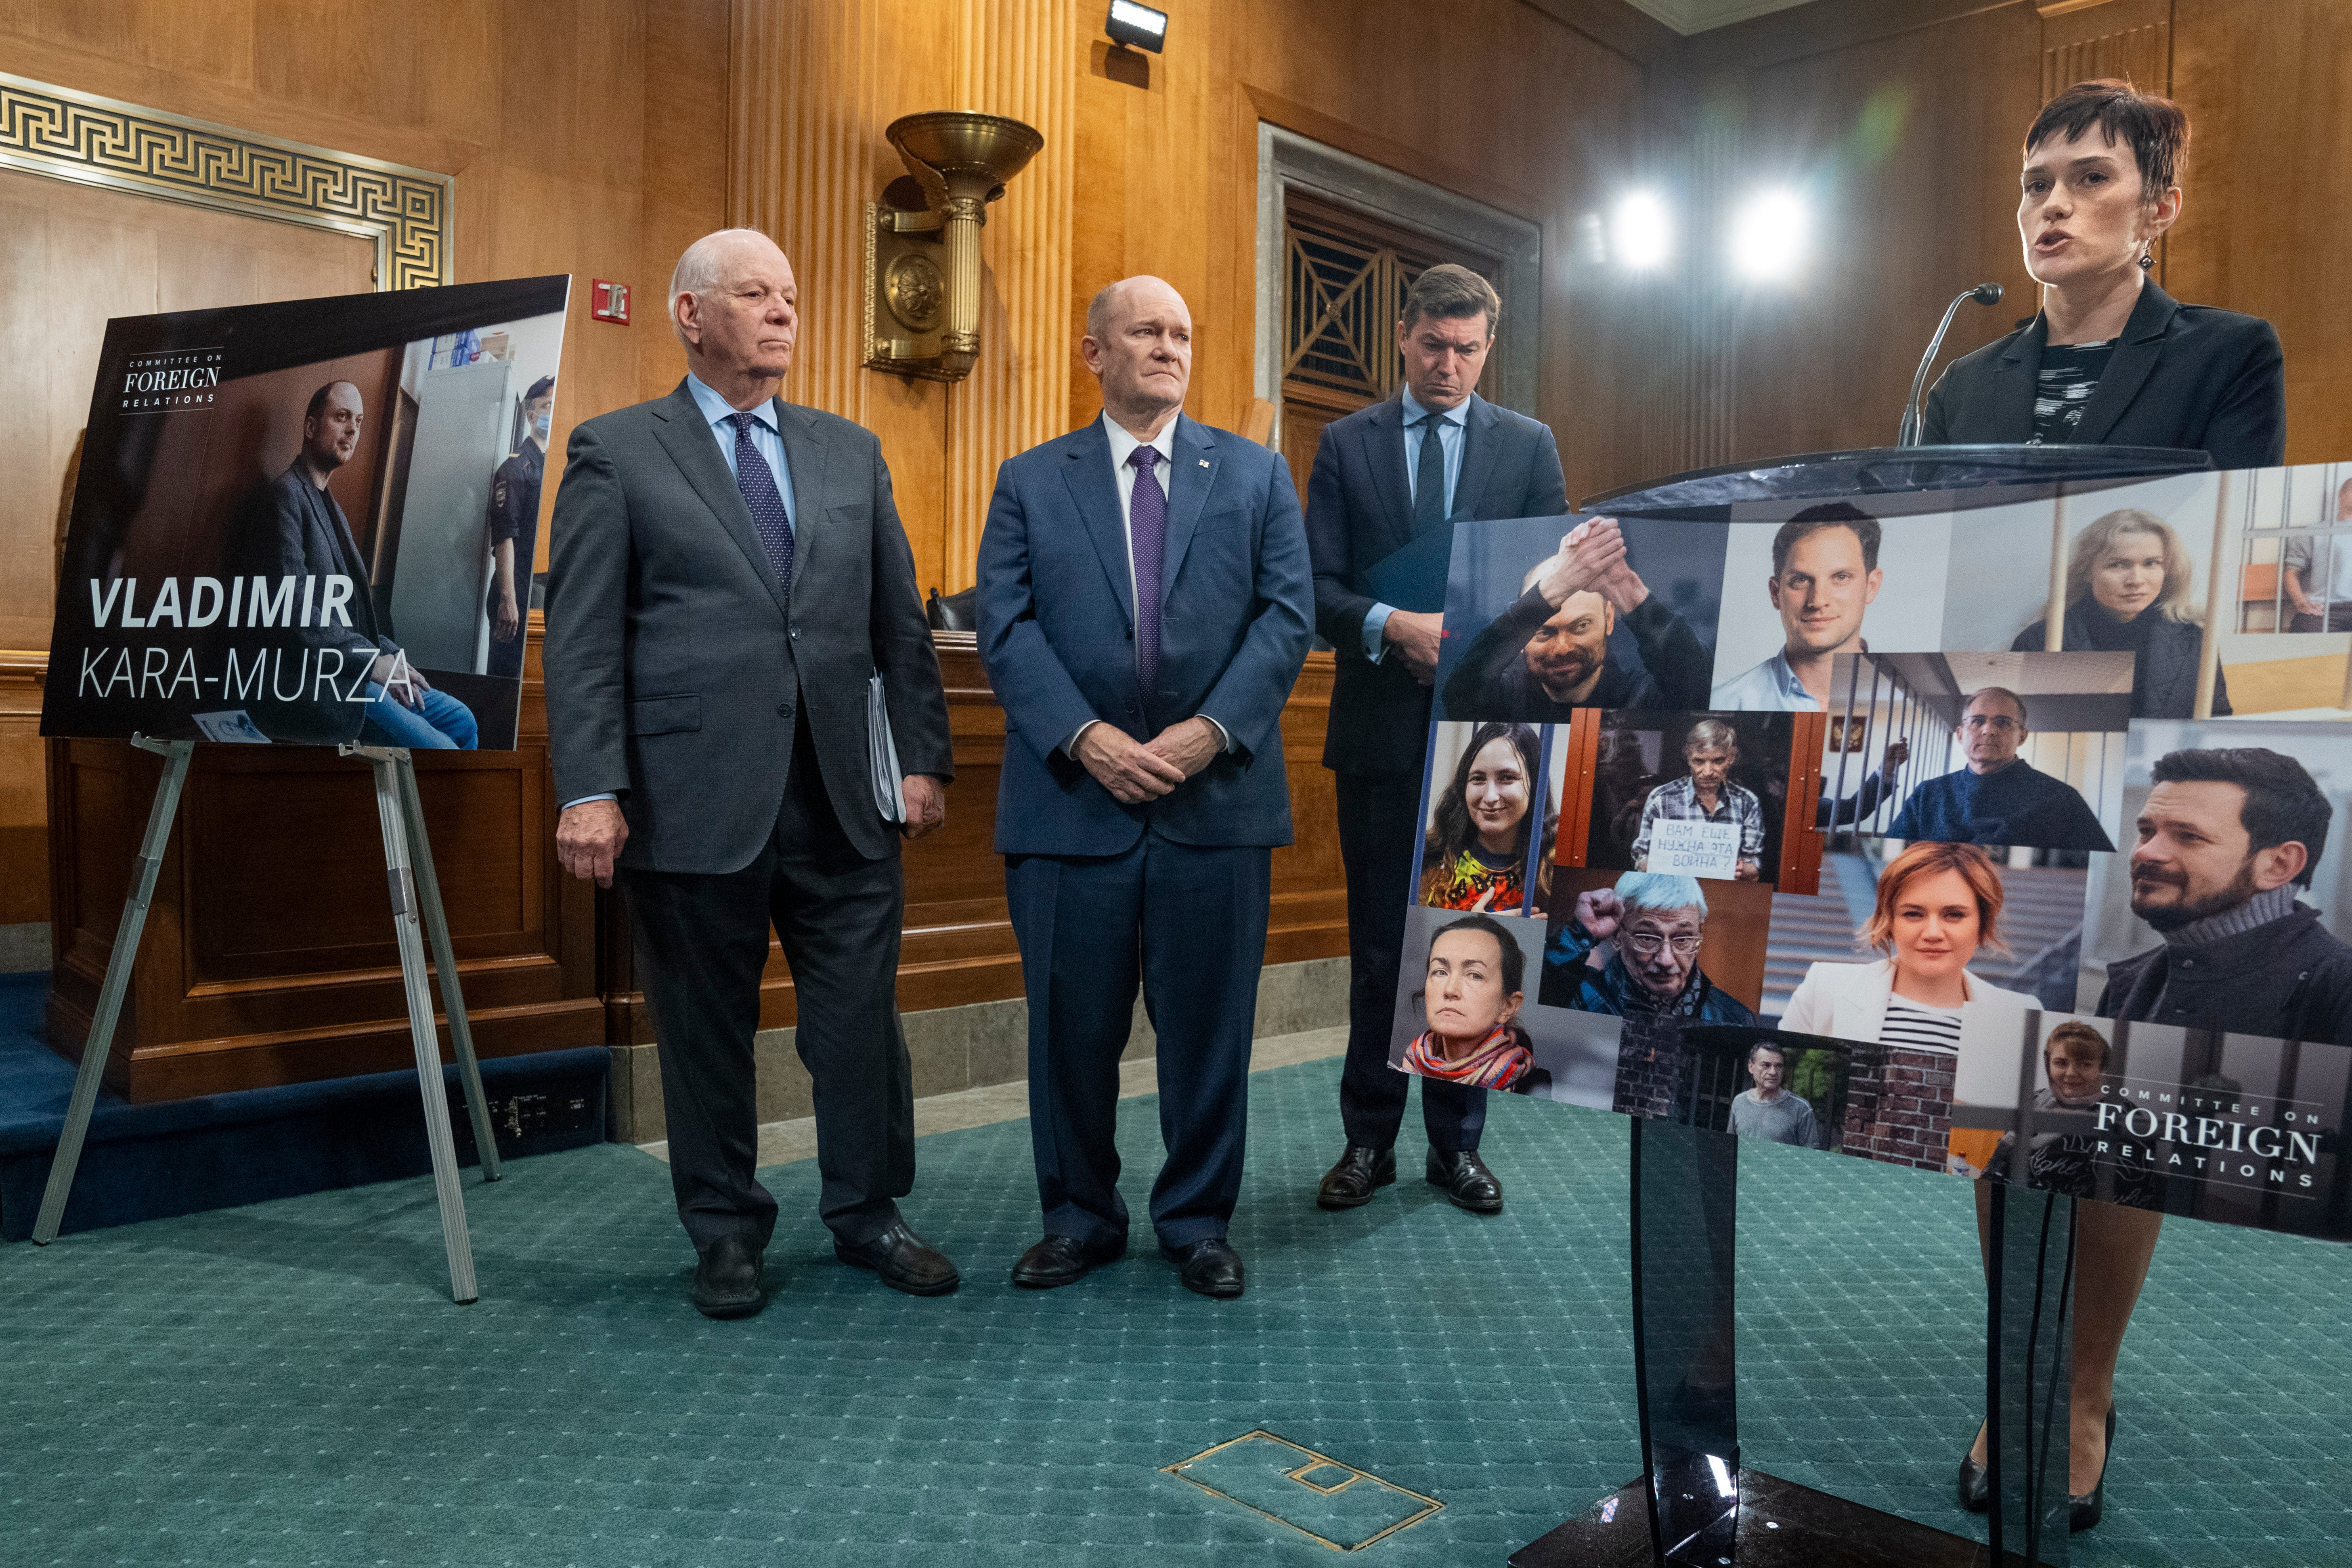 Senator Ben Cardin, far left, chair of the Senate Foreign Relations Committee, stands with Evgenia Kara-Murza in Washington on Tuesday